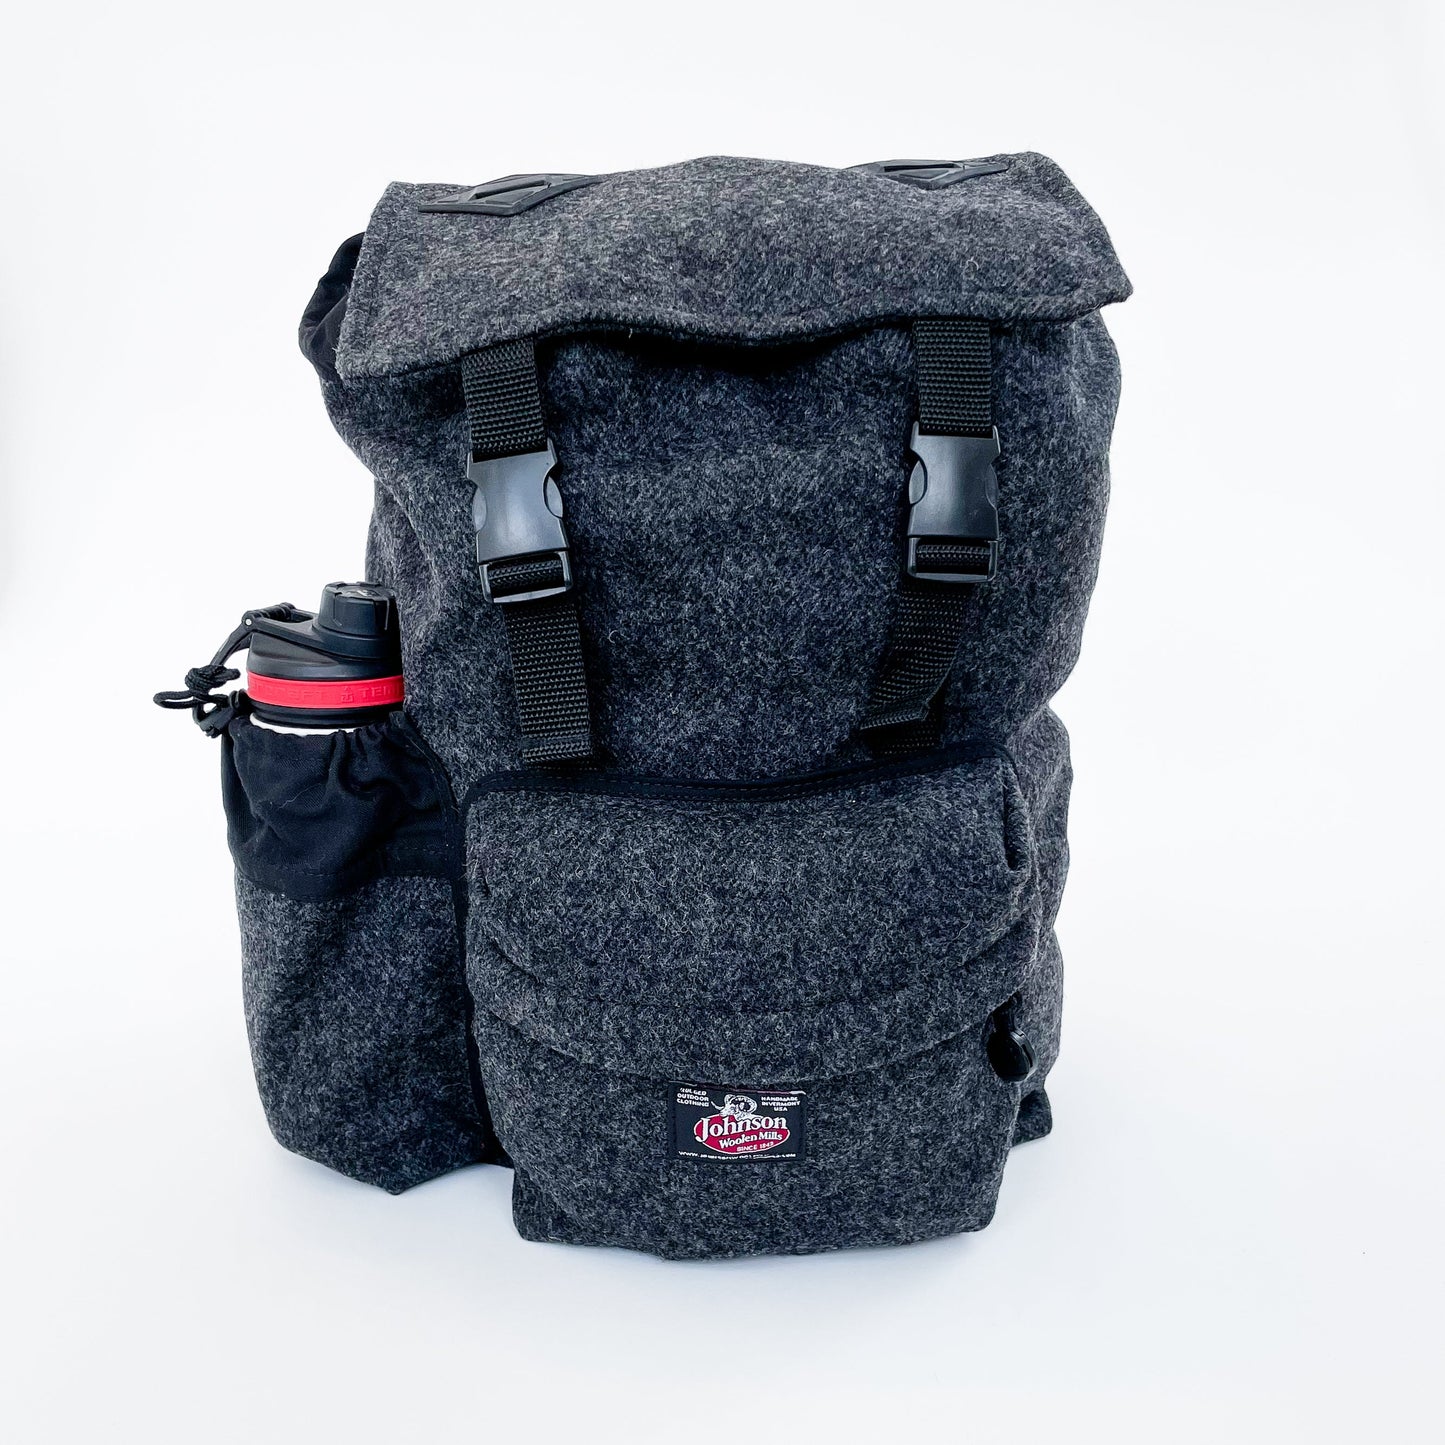 Wool back pack in grey, shown with water bottle in side pocket